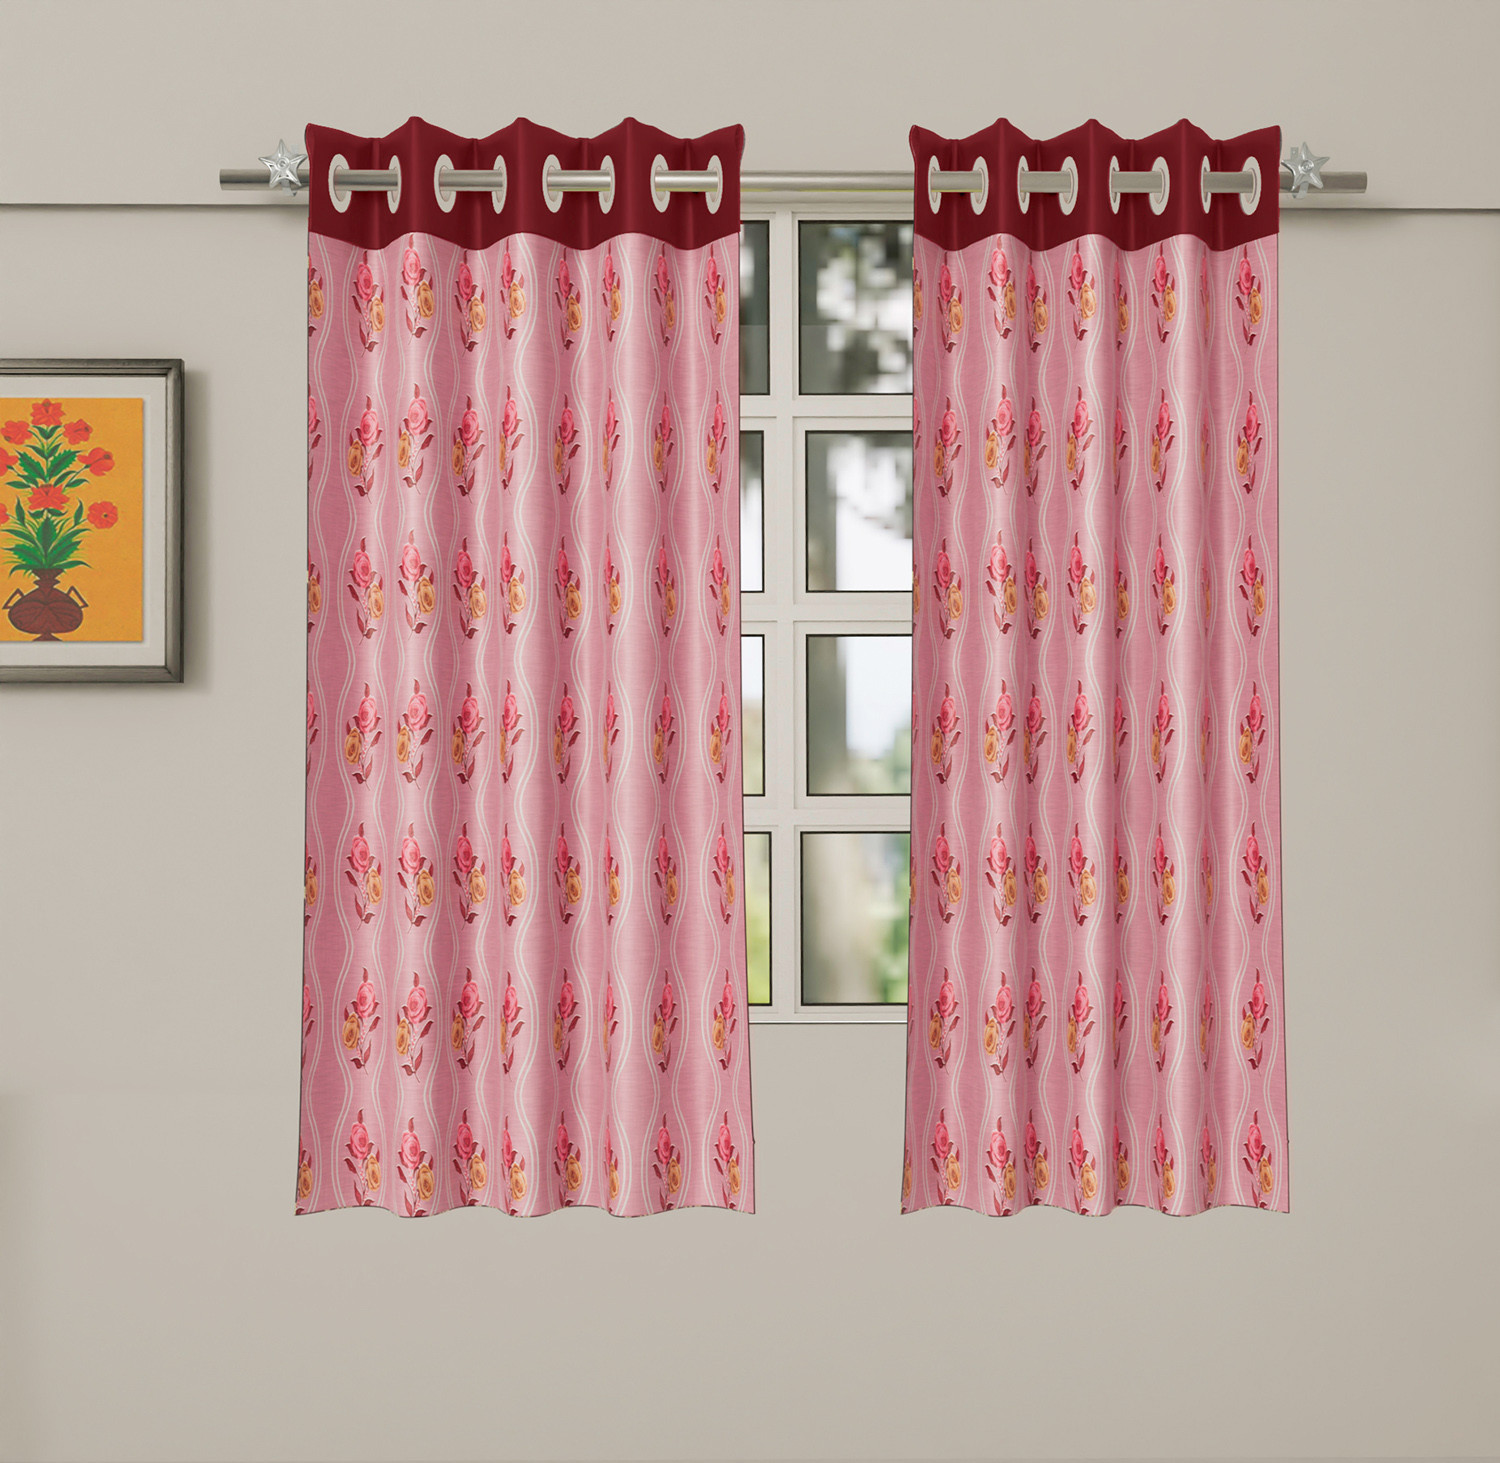 Kuber Industries Polyester Decorative 5 Feet Window Curtain | Rose Print Darkening Blackout | Drapes Curtain With 8 Eyelet For Home & Office (Pink)